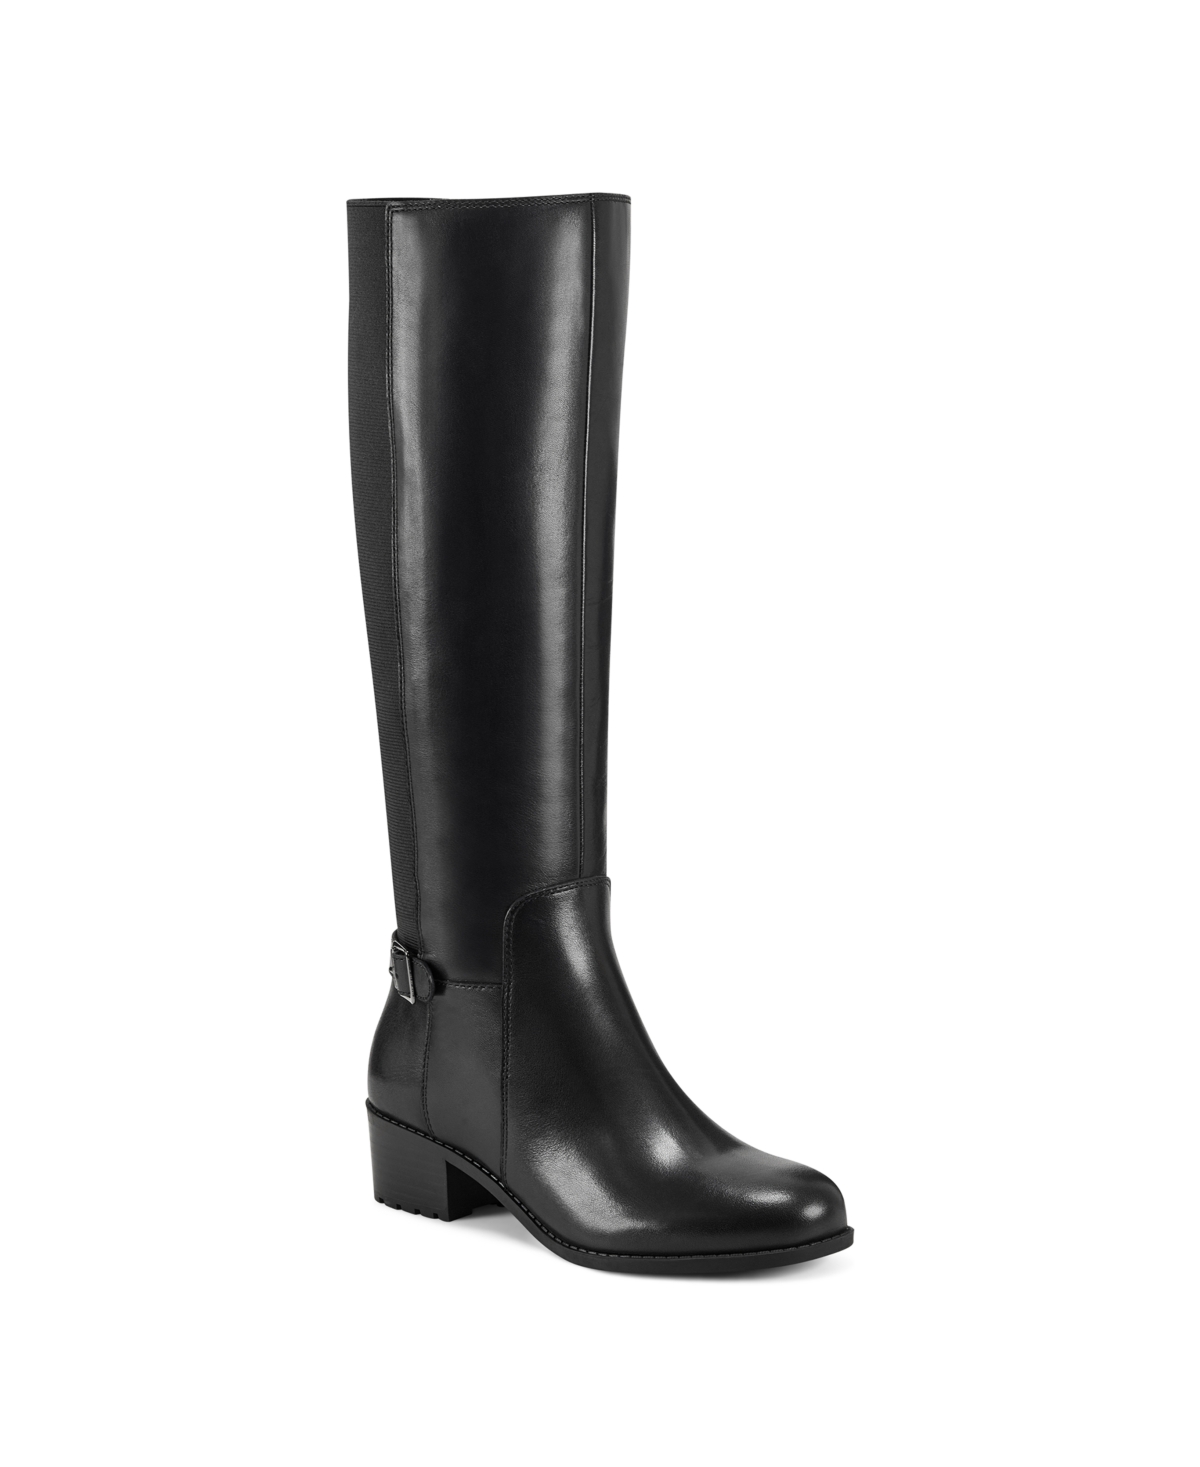 UPC 195608202328 product image for Easy Spirit Women's Chaza Tall Regular Calf Boots Women's Shoes | upcitemdb.com